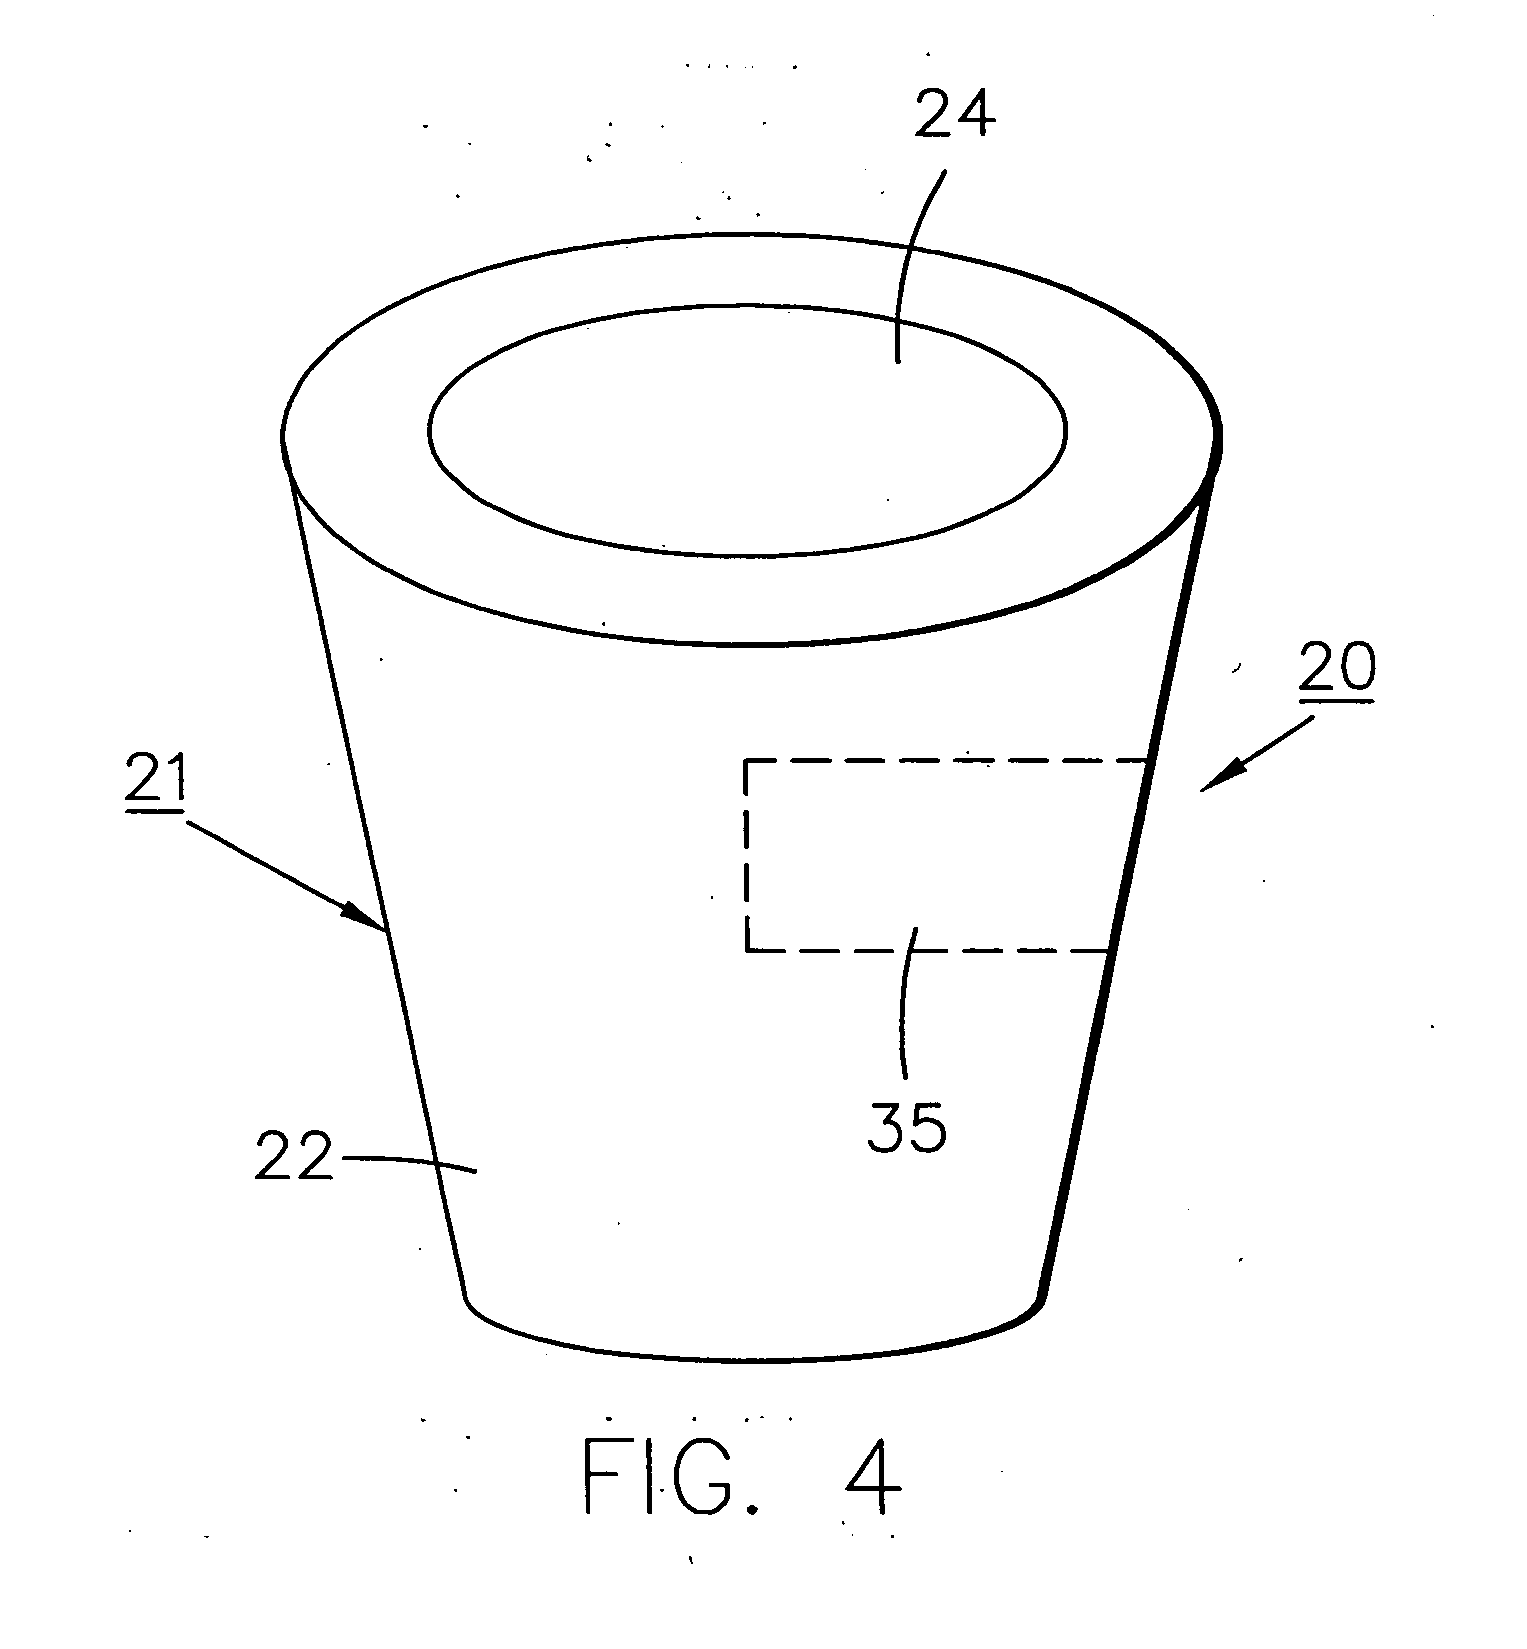 Multi-purpose combined drug delivery and heat therapy treatment system